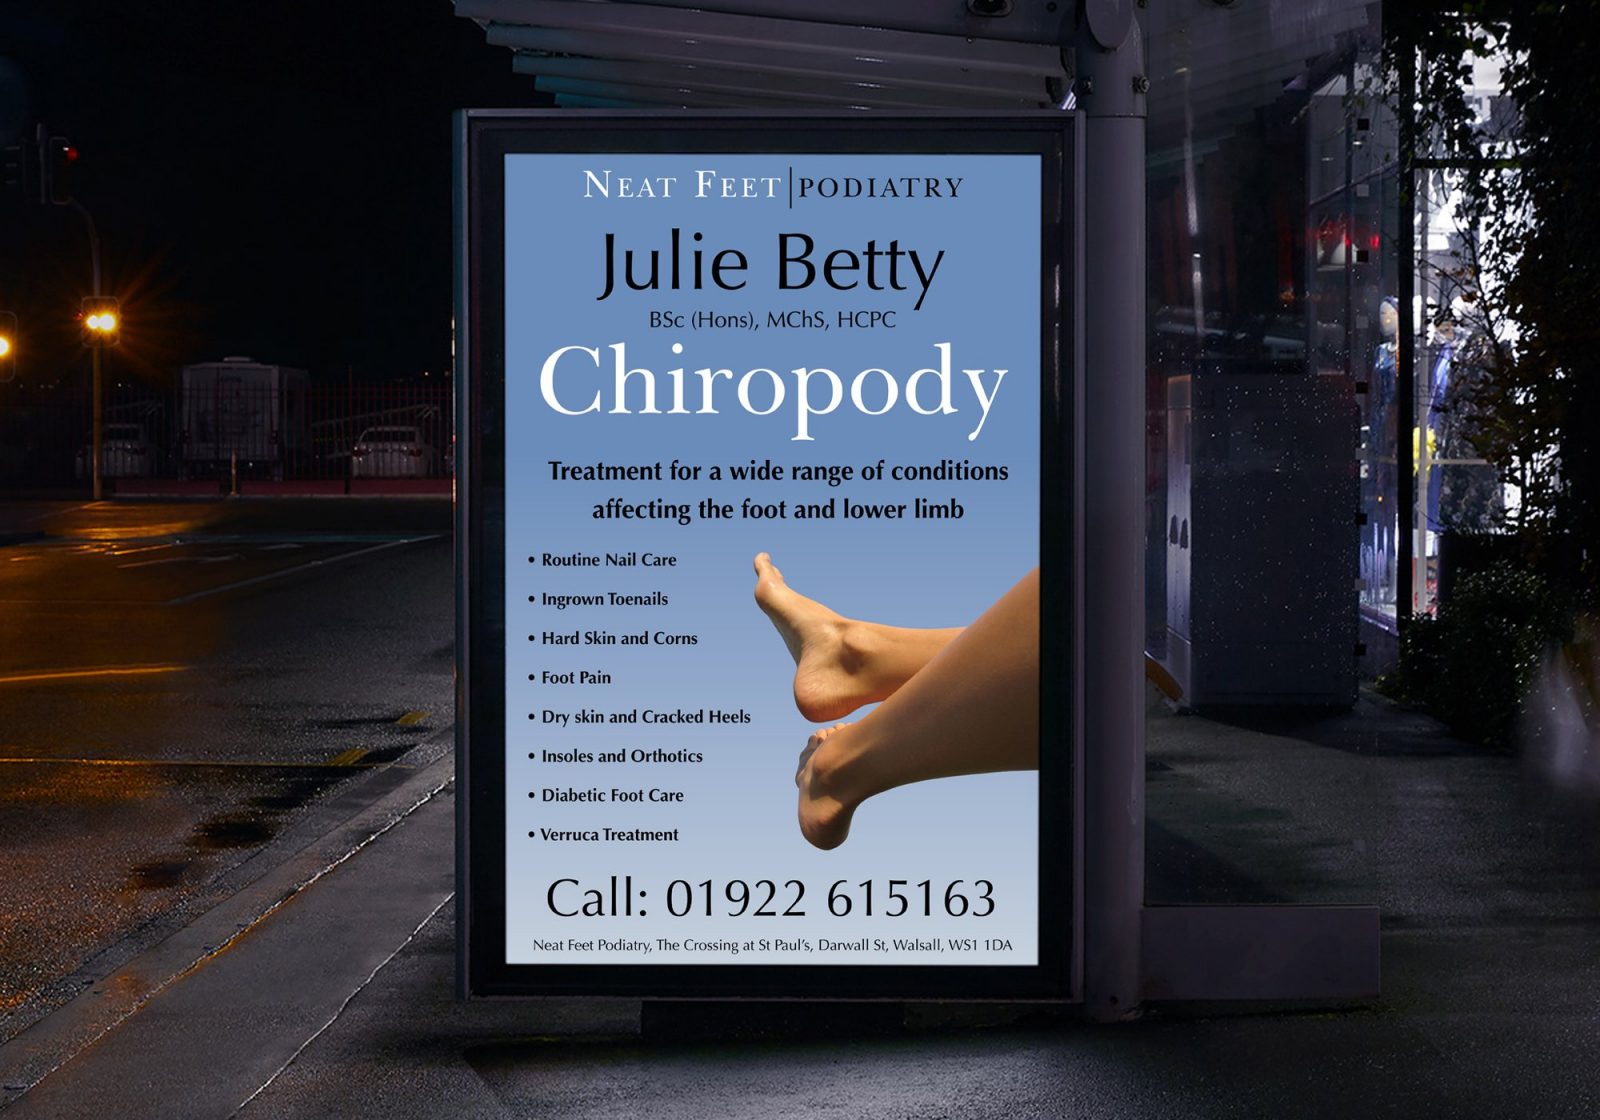 Poster in a bus stop shelter at night for Julie Betty Podiatry